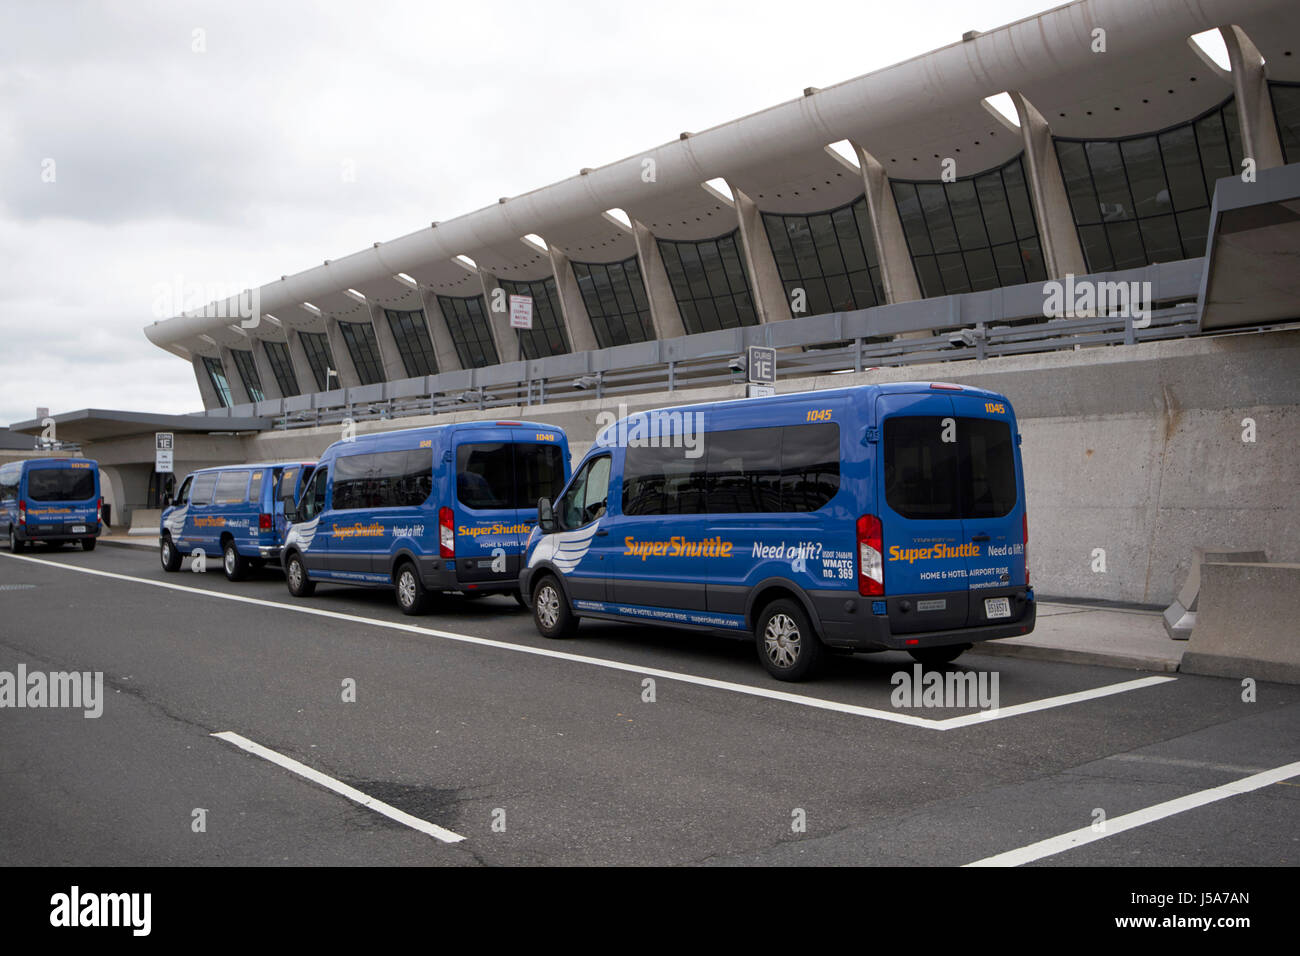 supershuttle shared ride vans parked outside arrivals Dulles international airport serving Washington DC USA Stock Photo